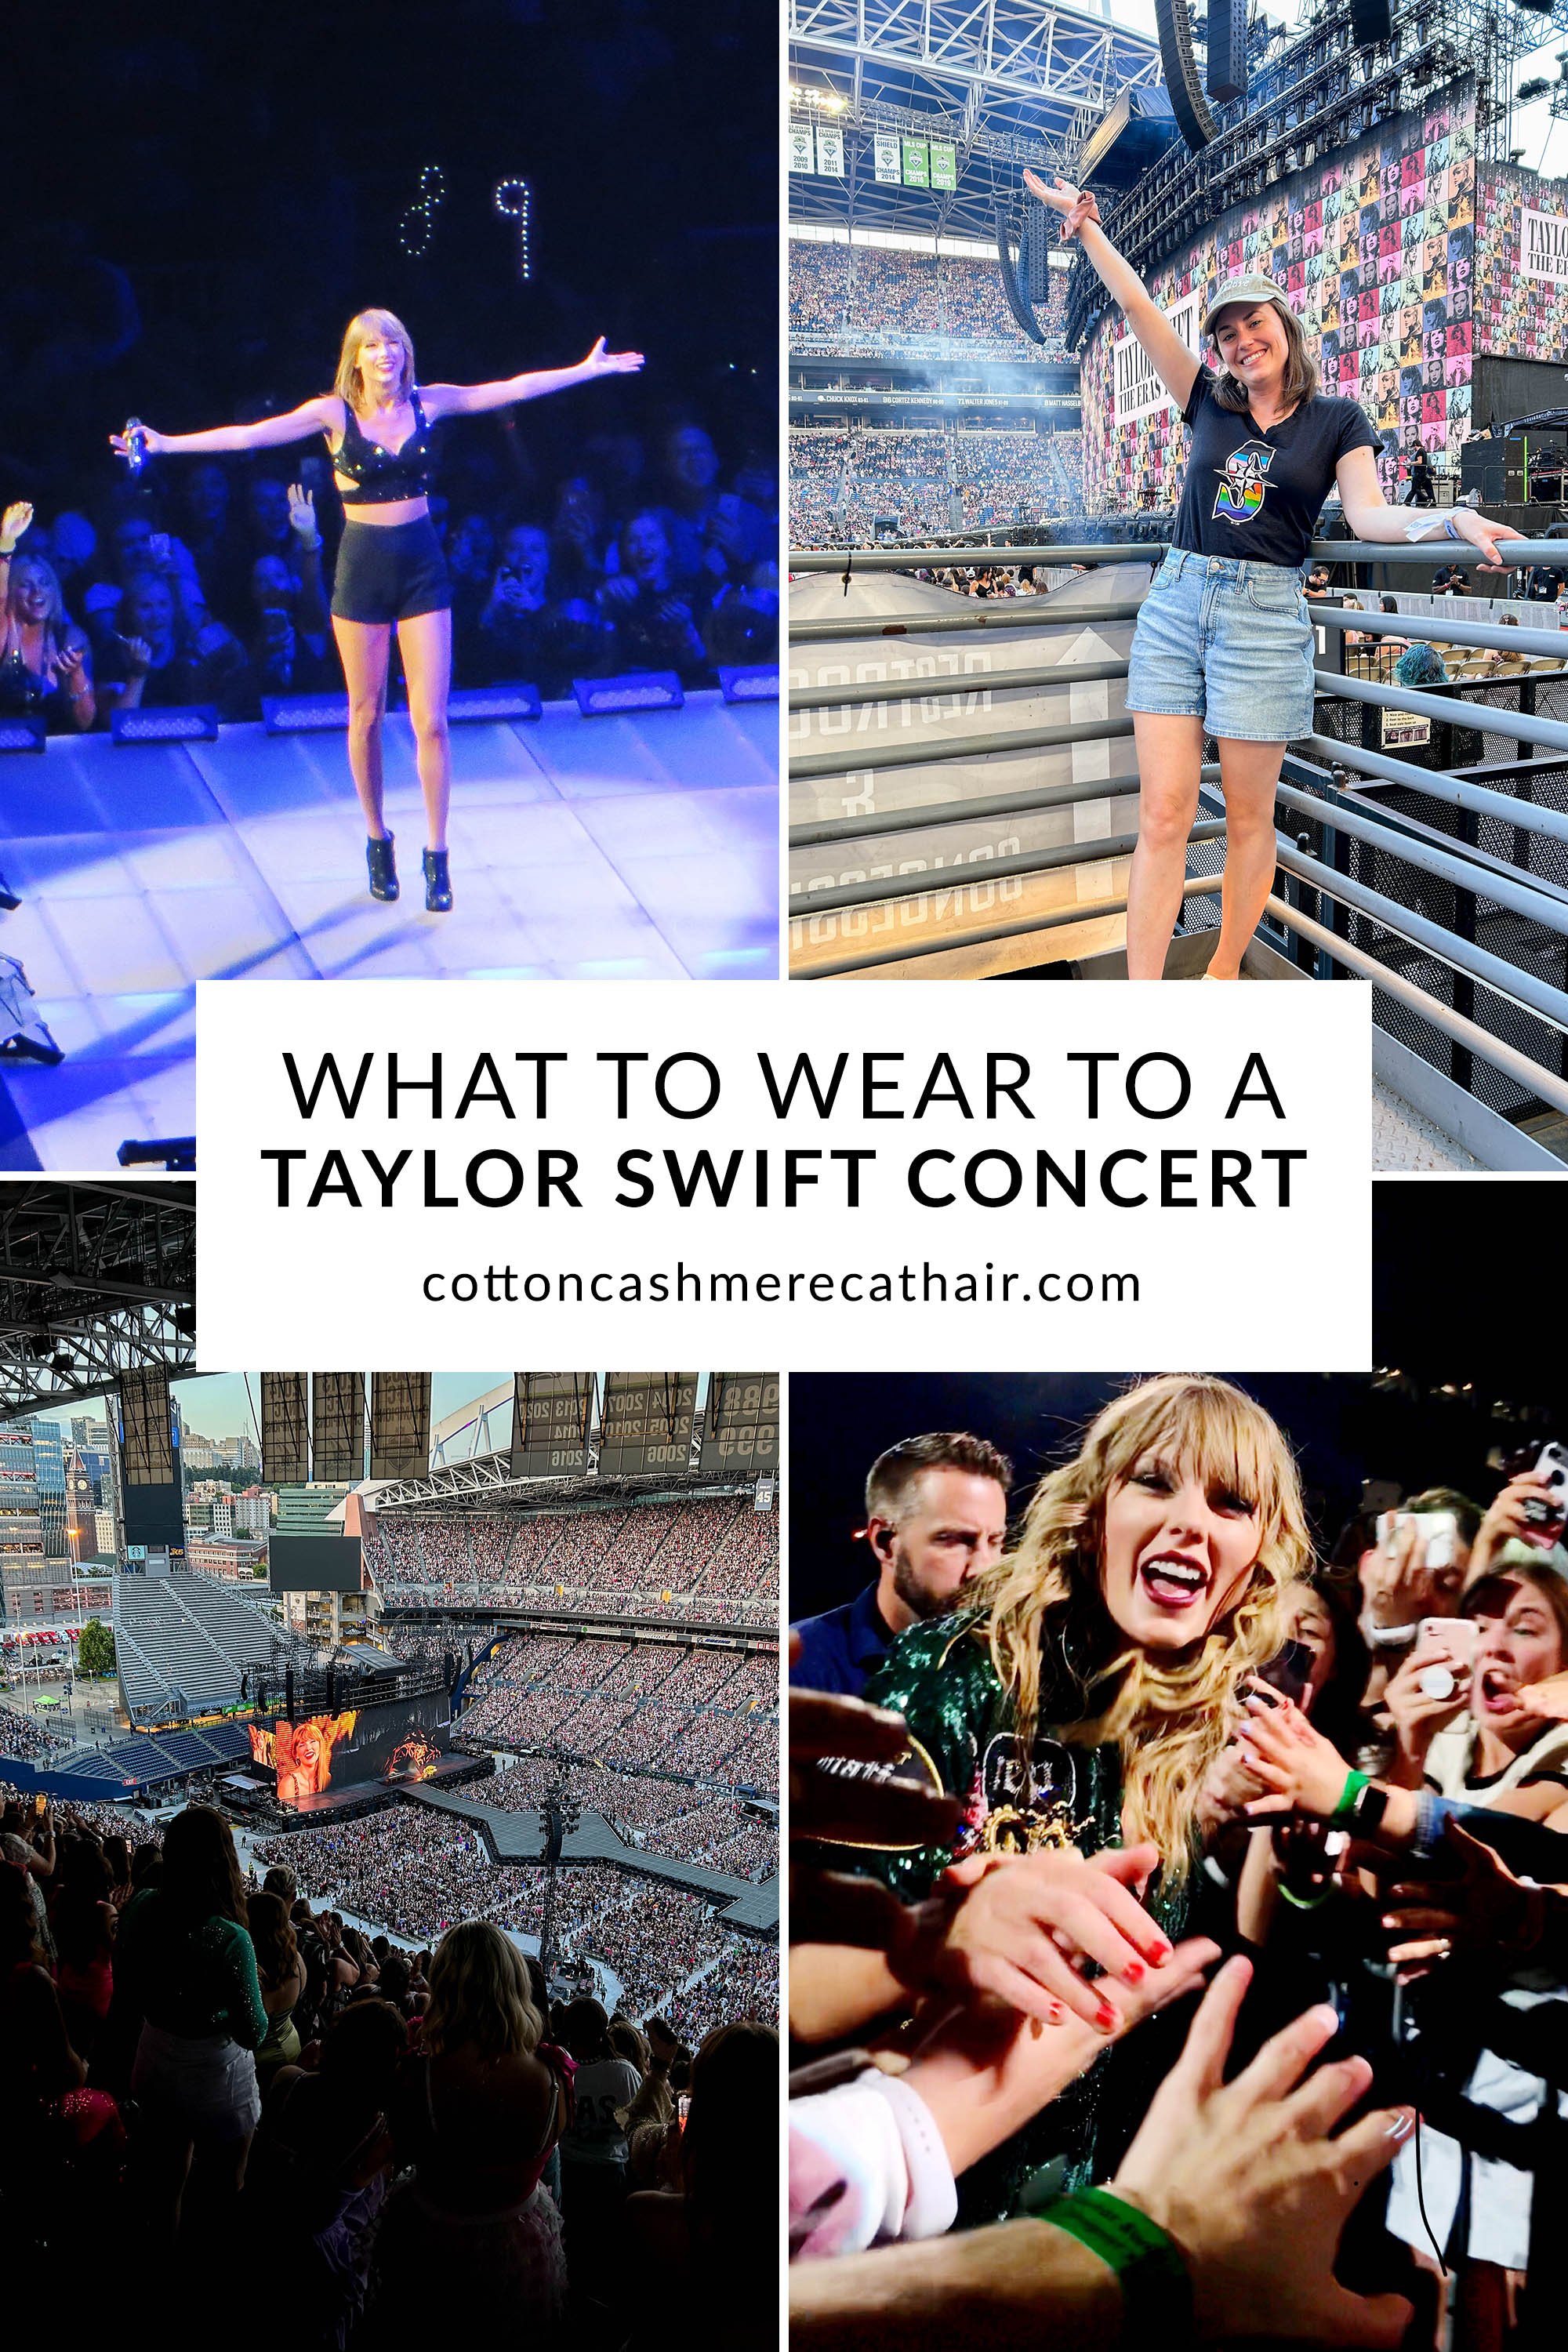 What To Wear To Taylor Swift Concert?